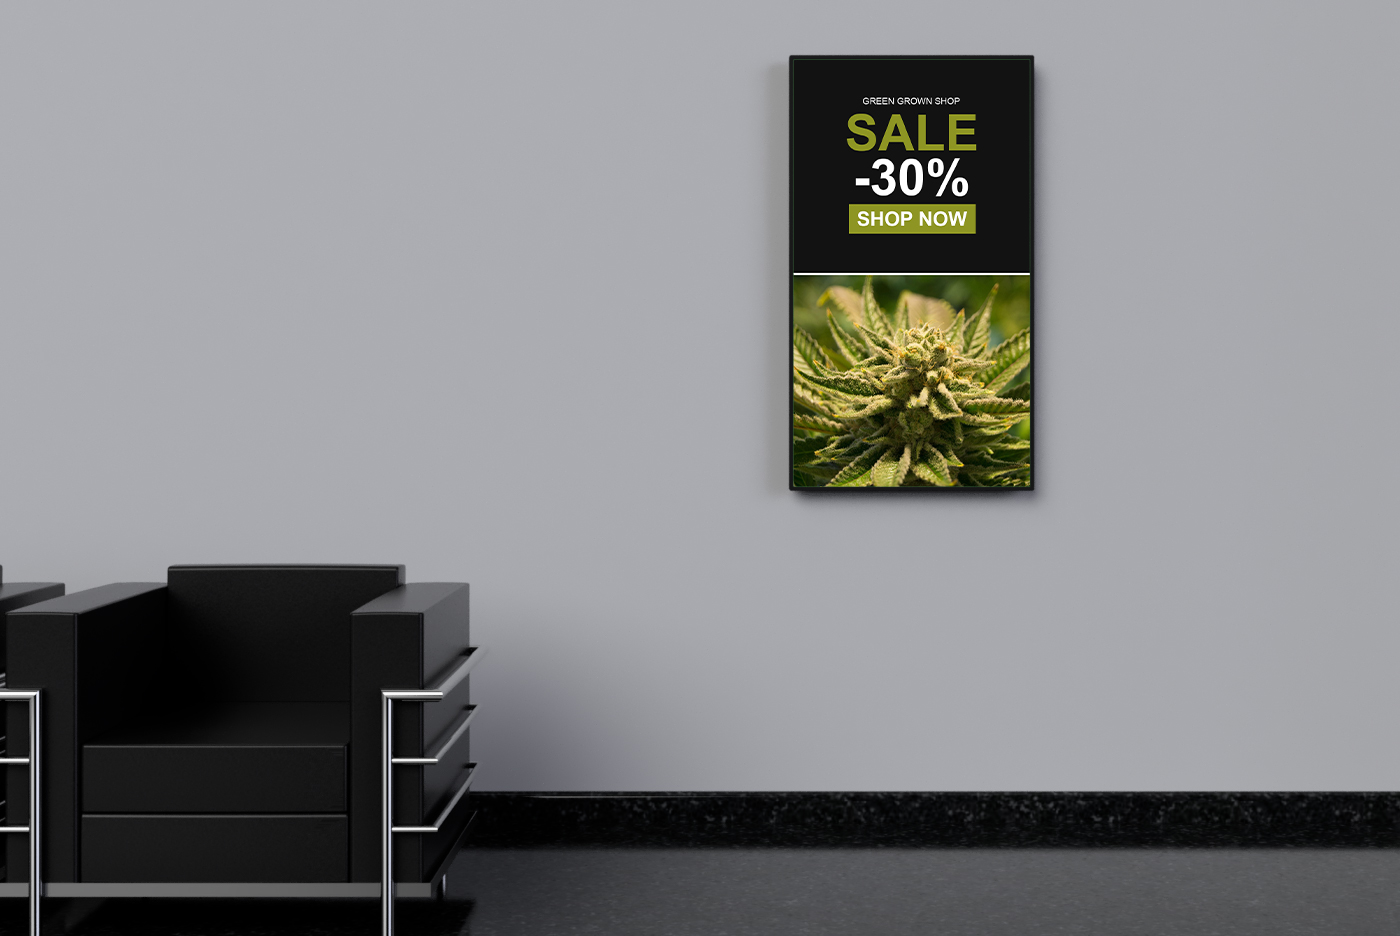 Promo Content for Digital Signage in Dispensary